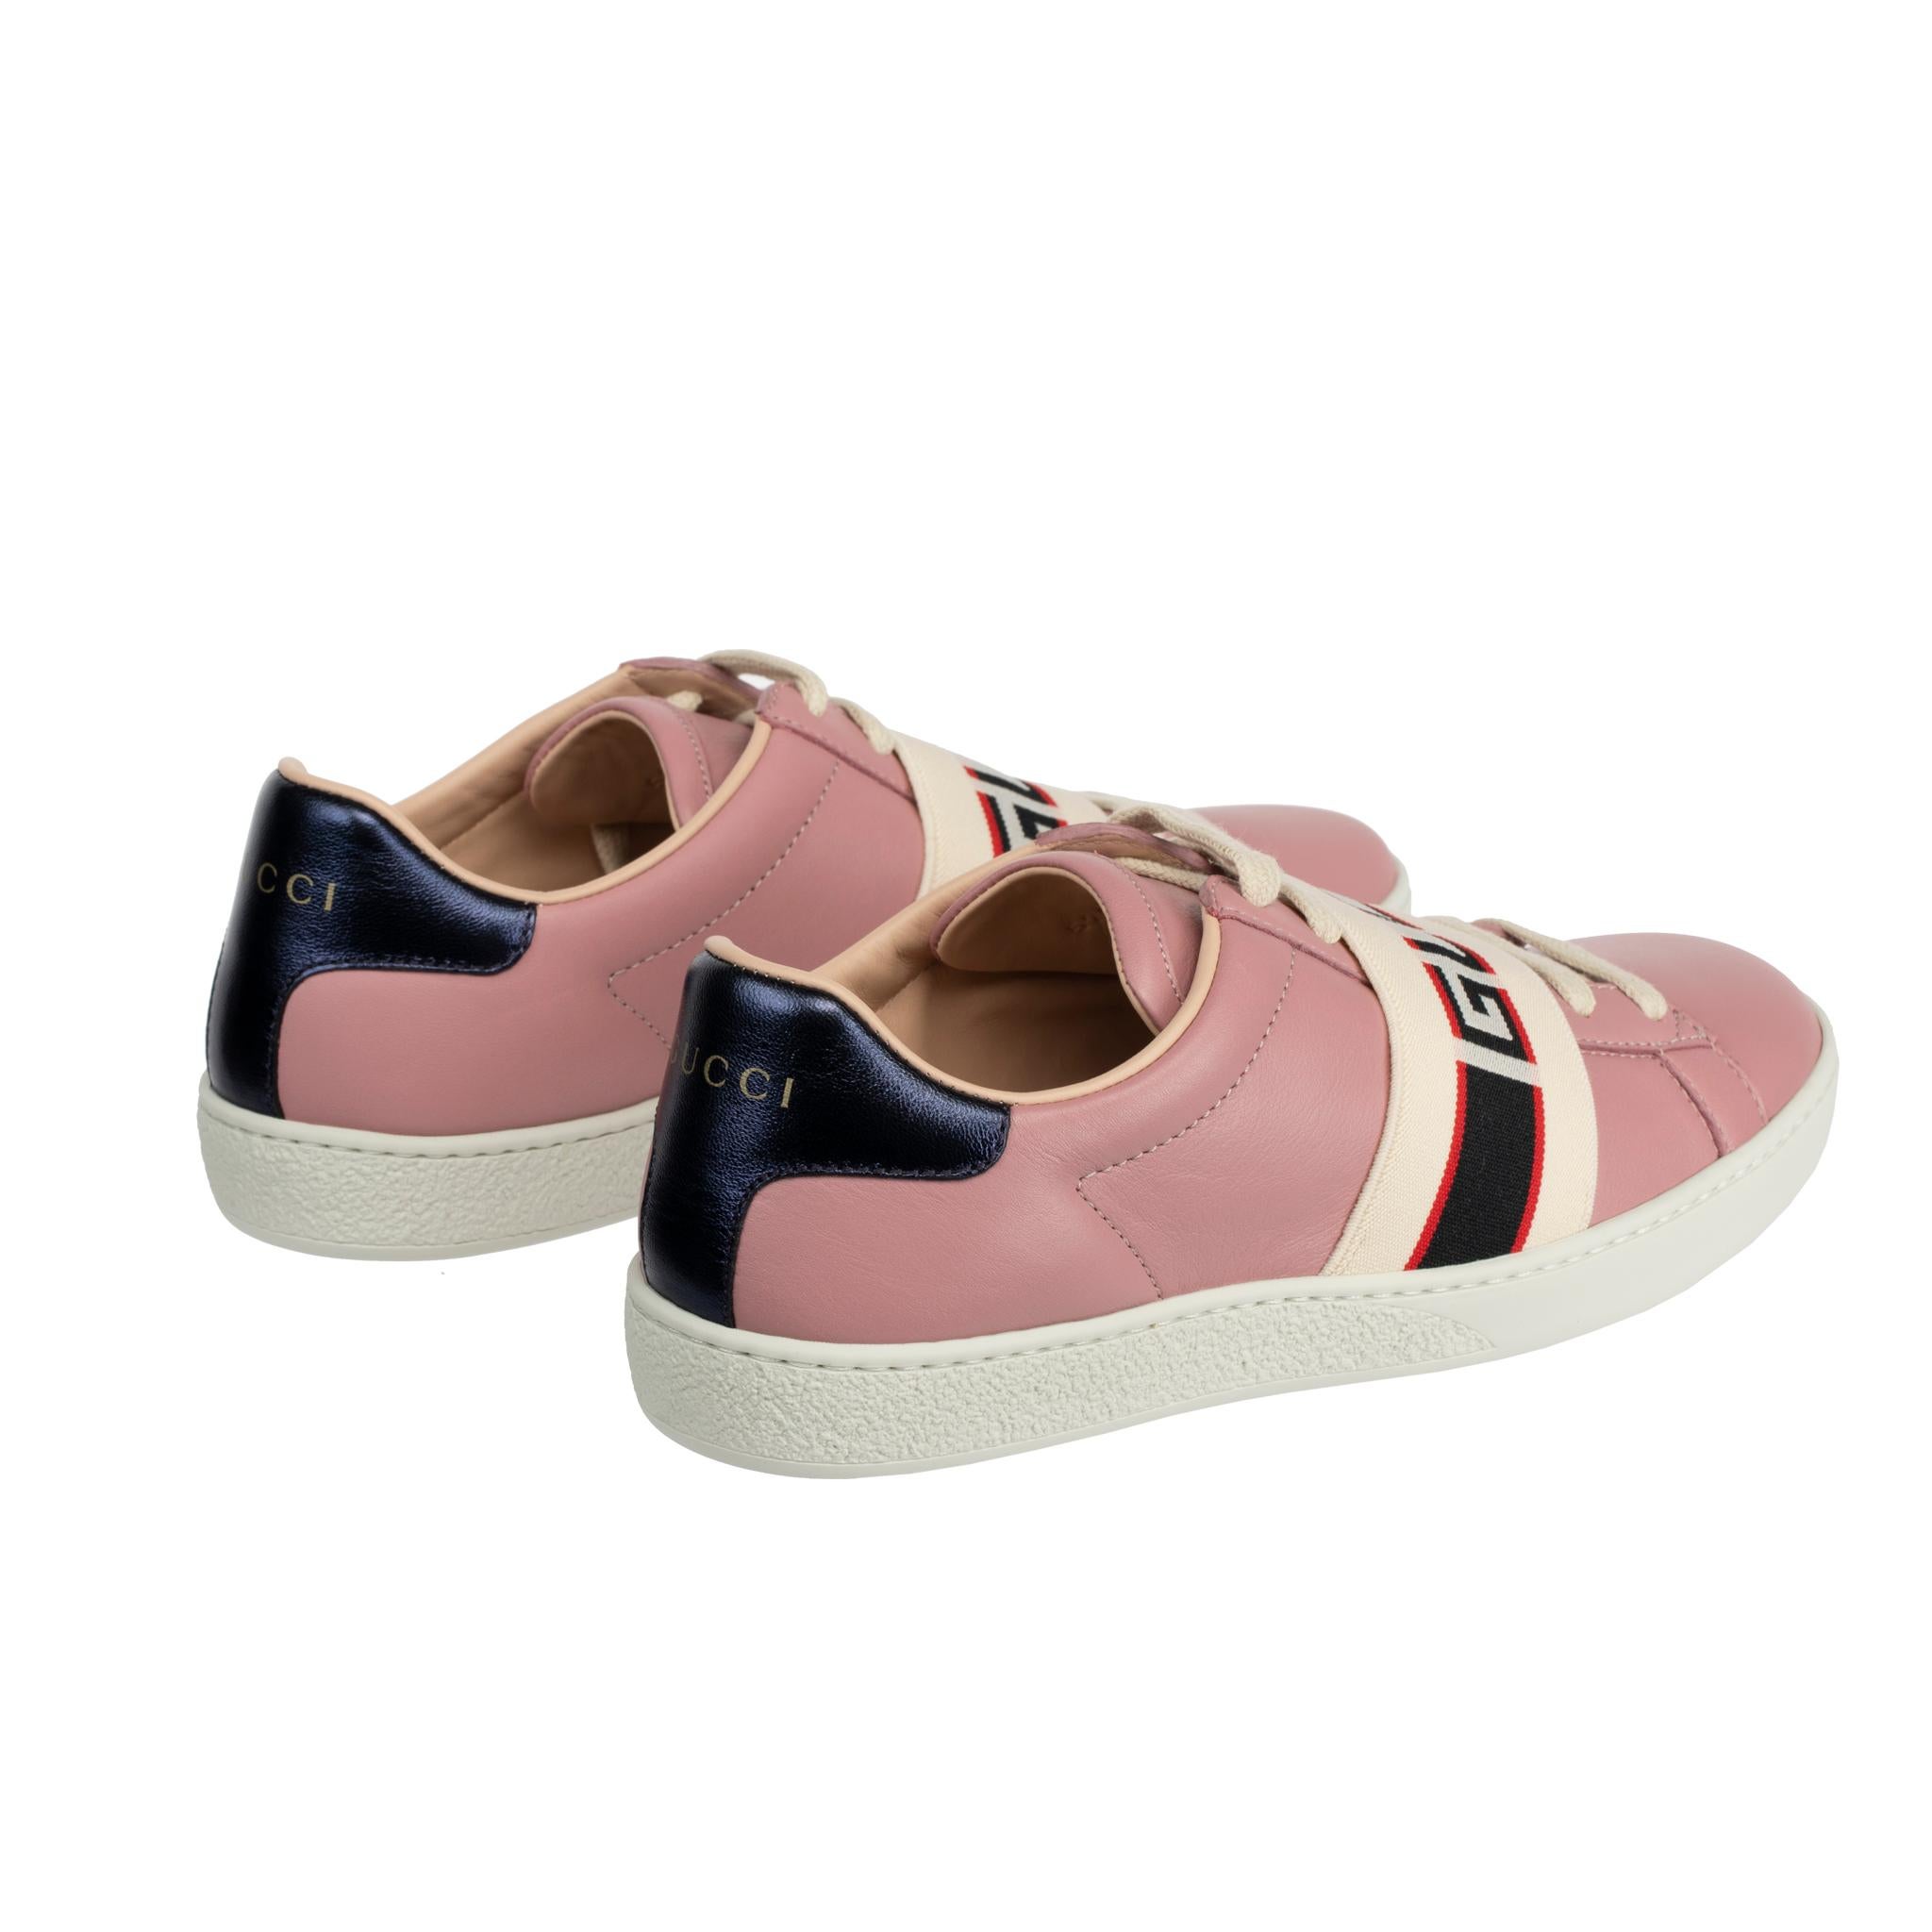 Gucci Ace Sneaker Dusty Pink & Metallic Blue 

Brand:

Cucci

Product:

Ace Sneakers With Gucci Logo Strap

Size:

35 It

Colour:

Dusty Pink & Metallic Blue

Material:

Smooth Leather

Condition:

Pristine; New Or Never Worn

Accompanied By:

Gucci